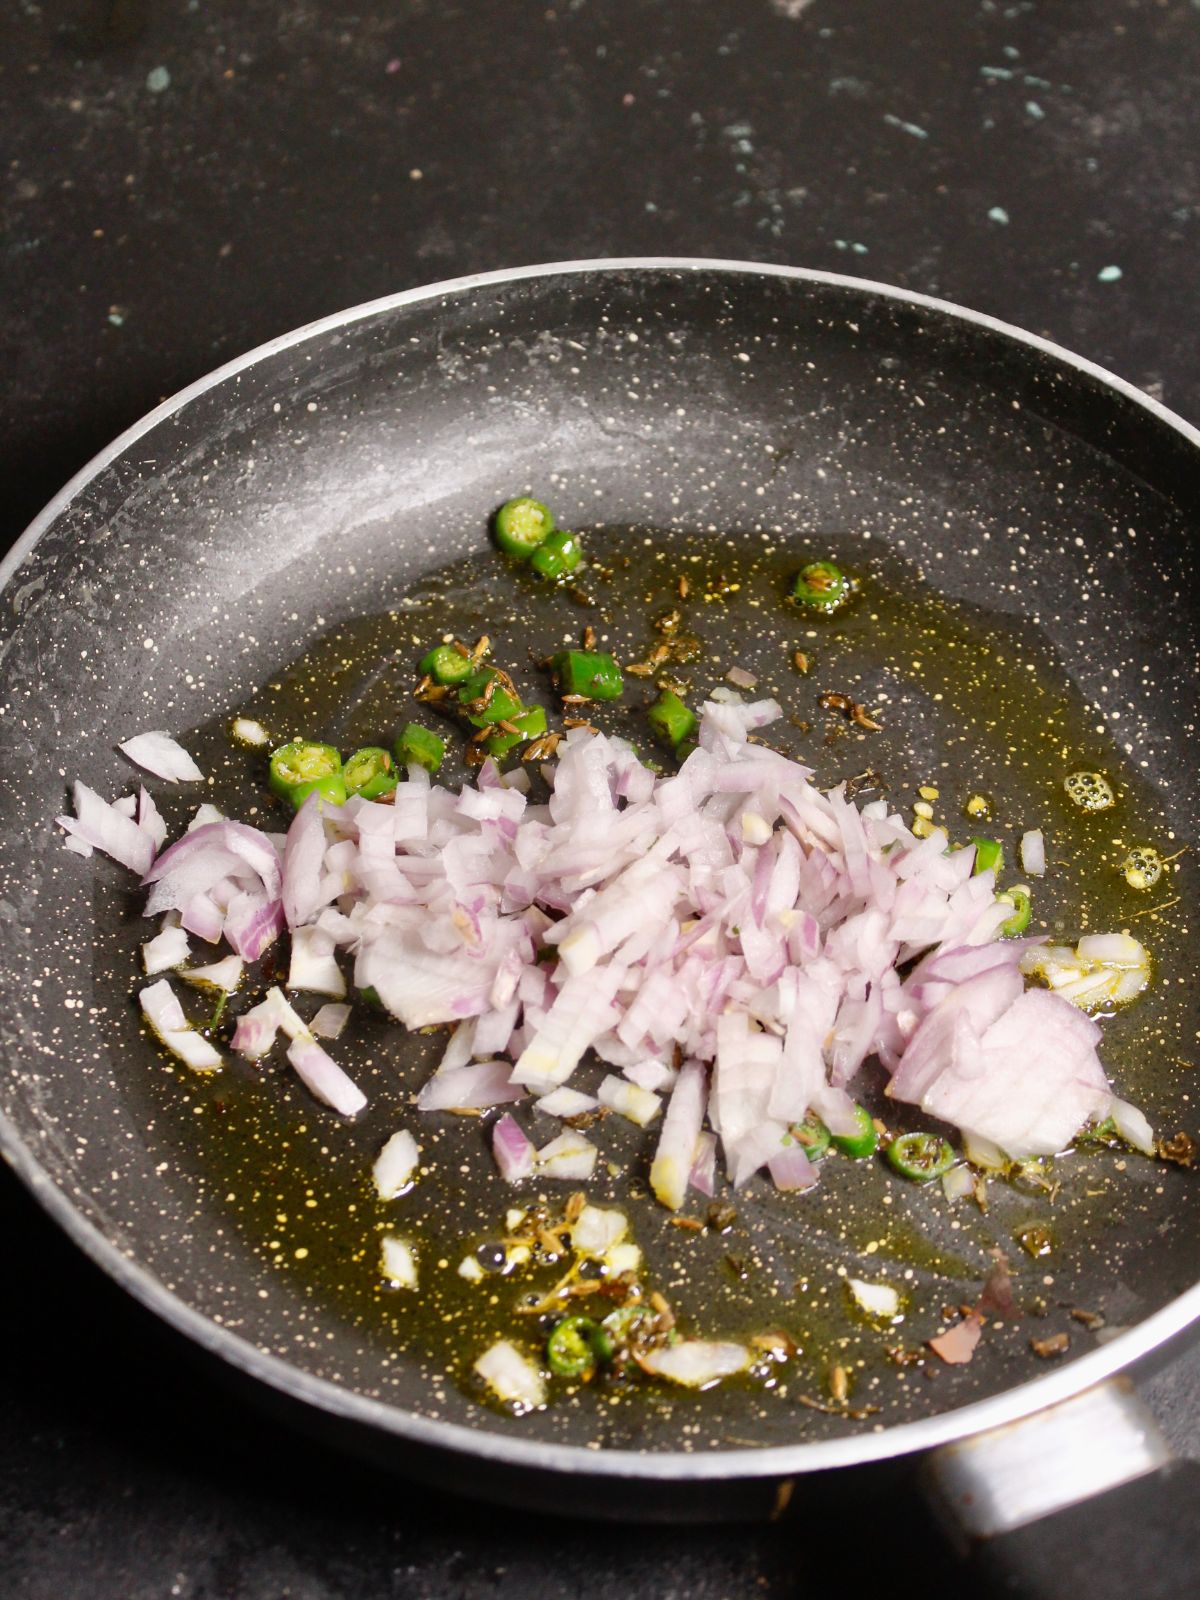 Add chopped onions to the pan 